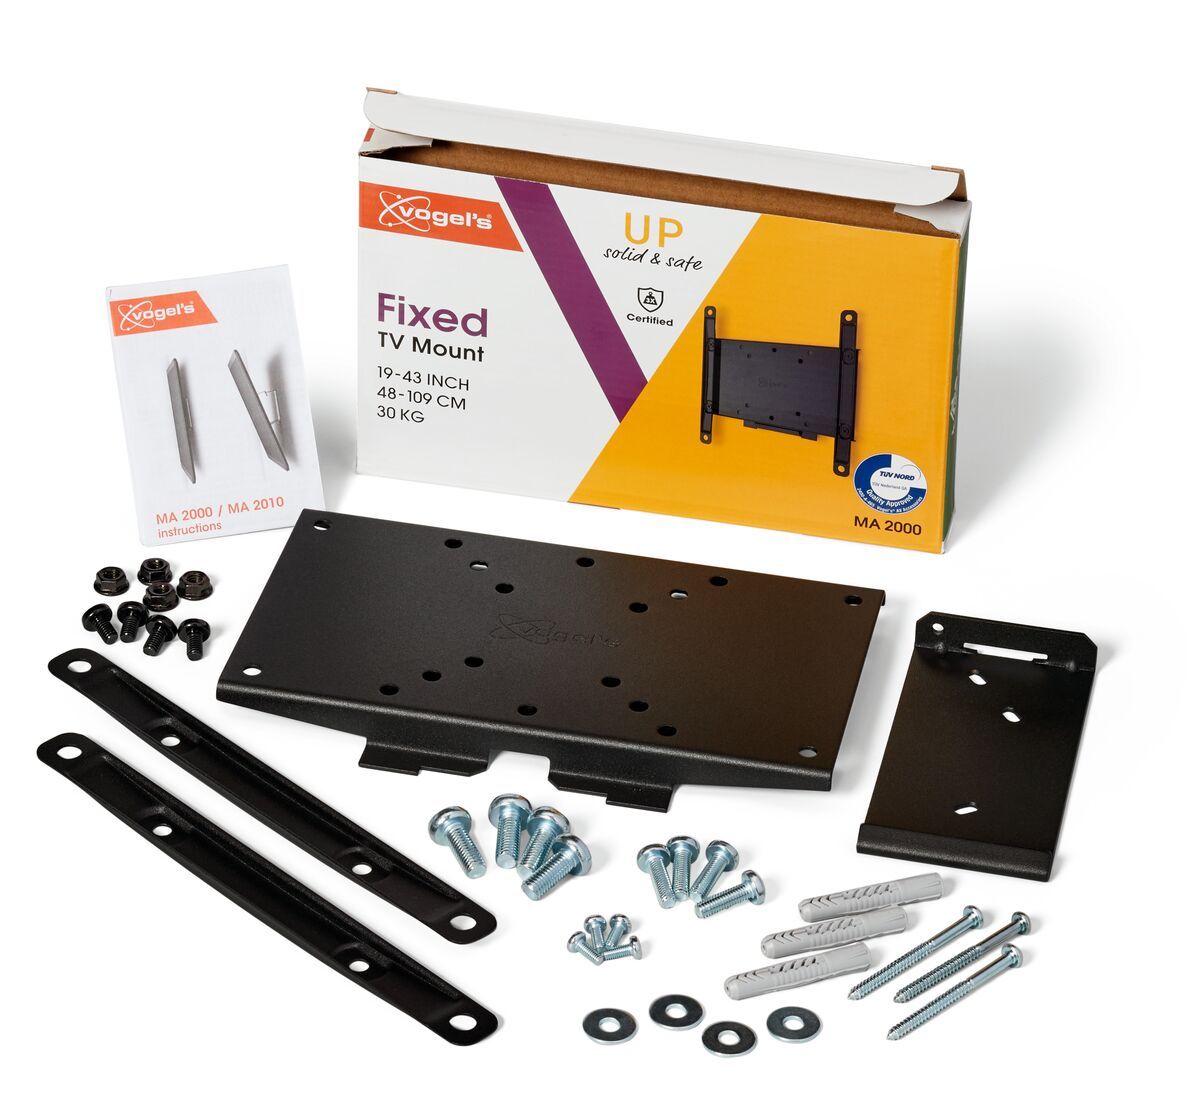 Vogel's MA 2000 Fixed TV Wall Mount - Suitable for 19 up to 43 inch TVs up to Unboxing